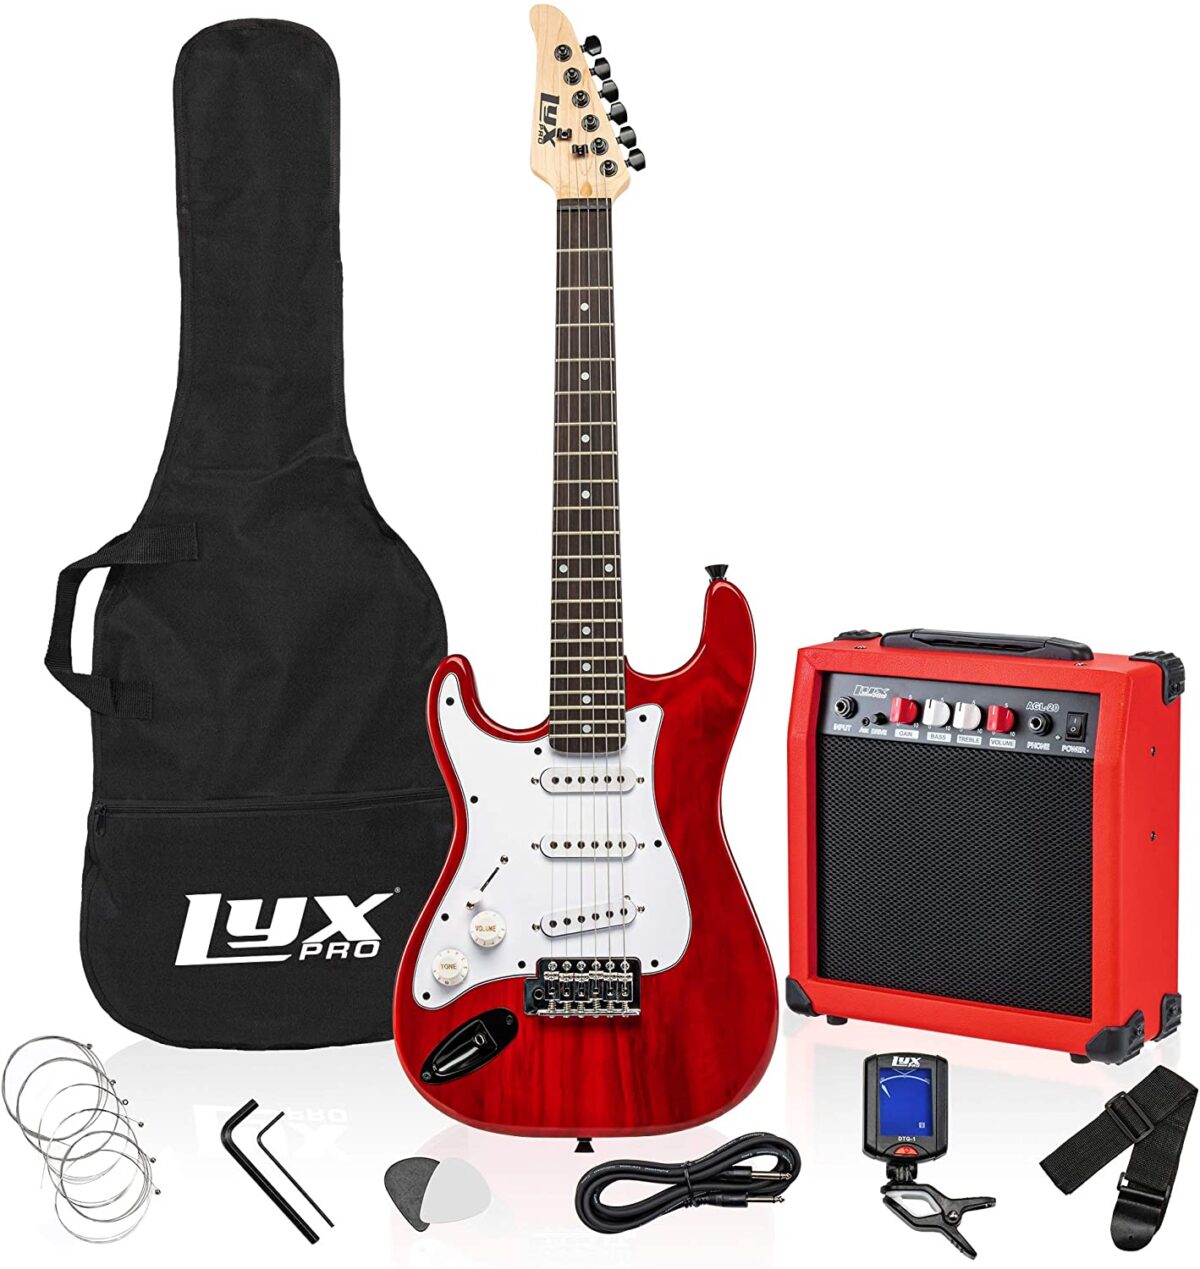 Buy the Best Electric Guitar for Small Hands and Progress with Your Guitar Lessons Faster